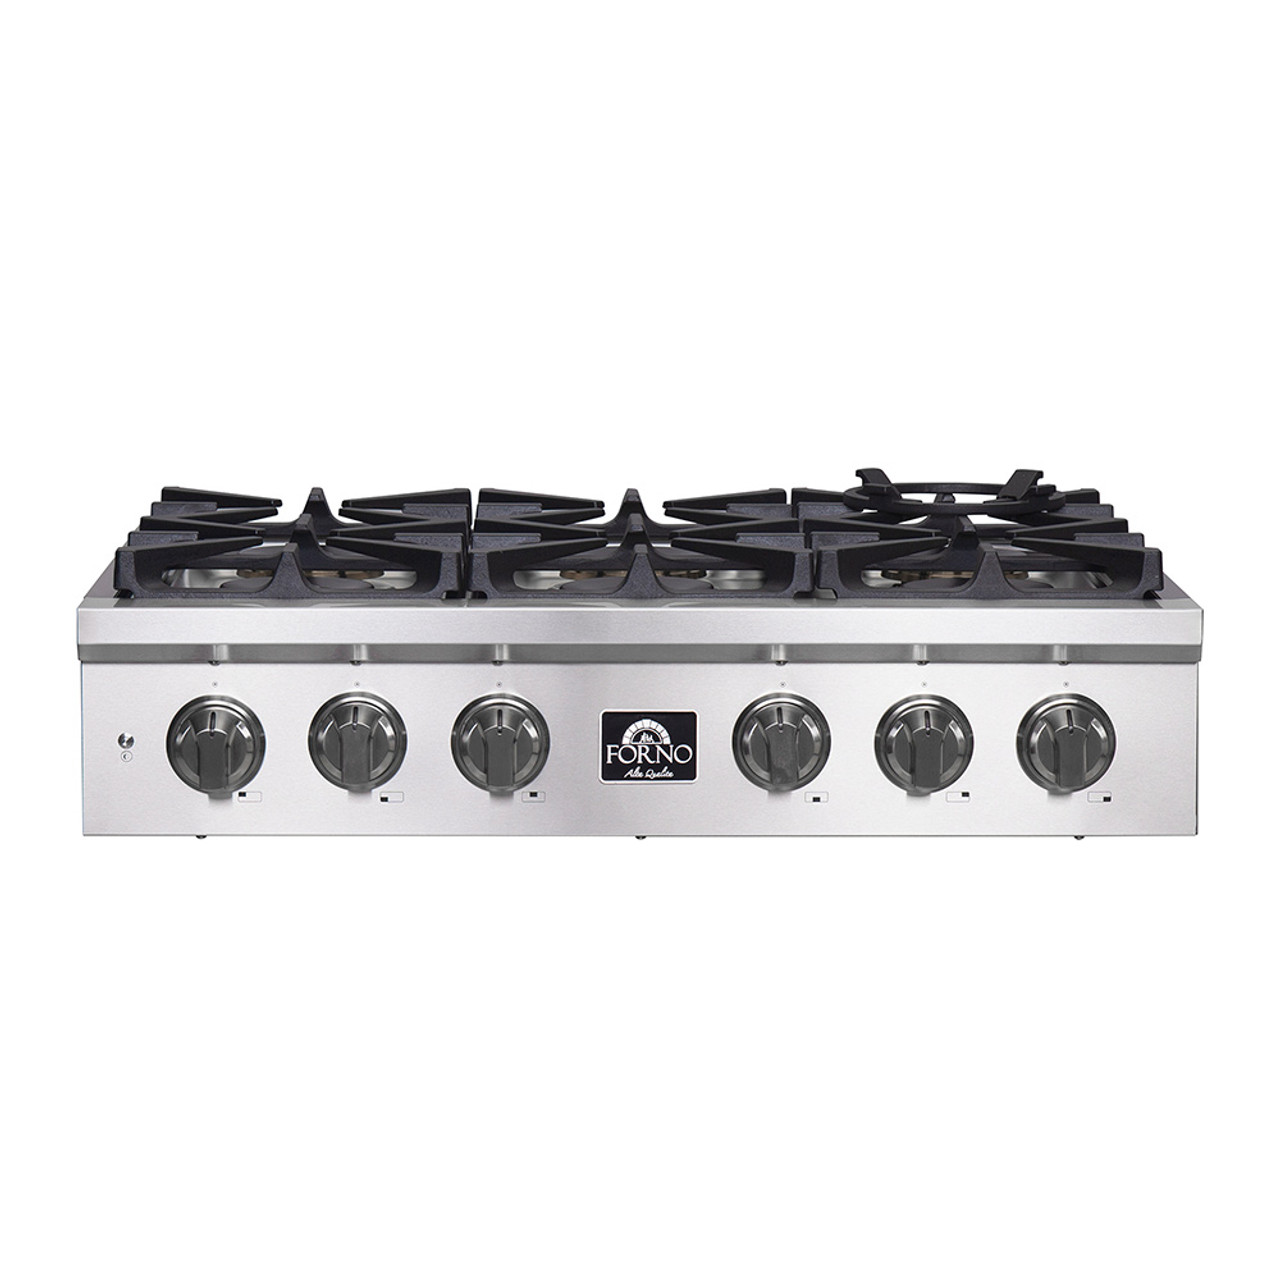 Forno Spezia 36 Gas Cooktop 6 Burners w/ Wok Ring and Grill